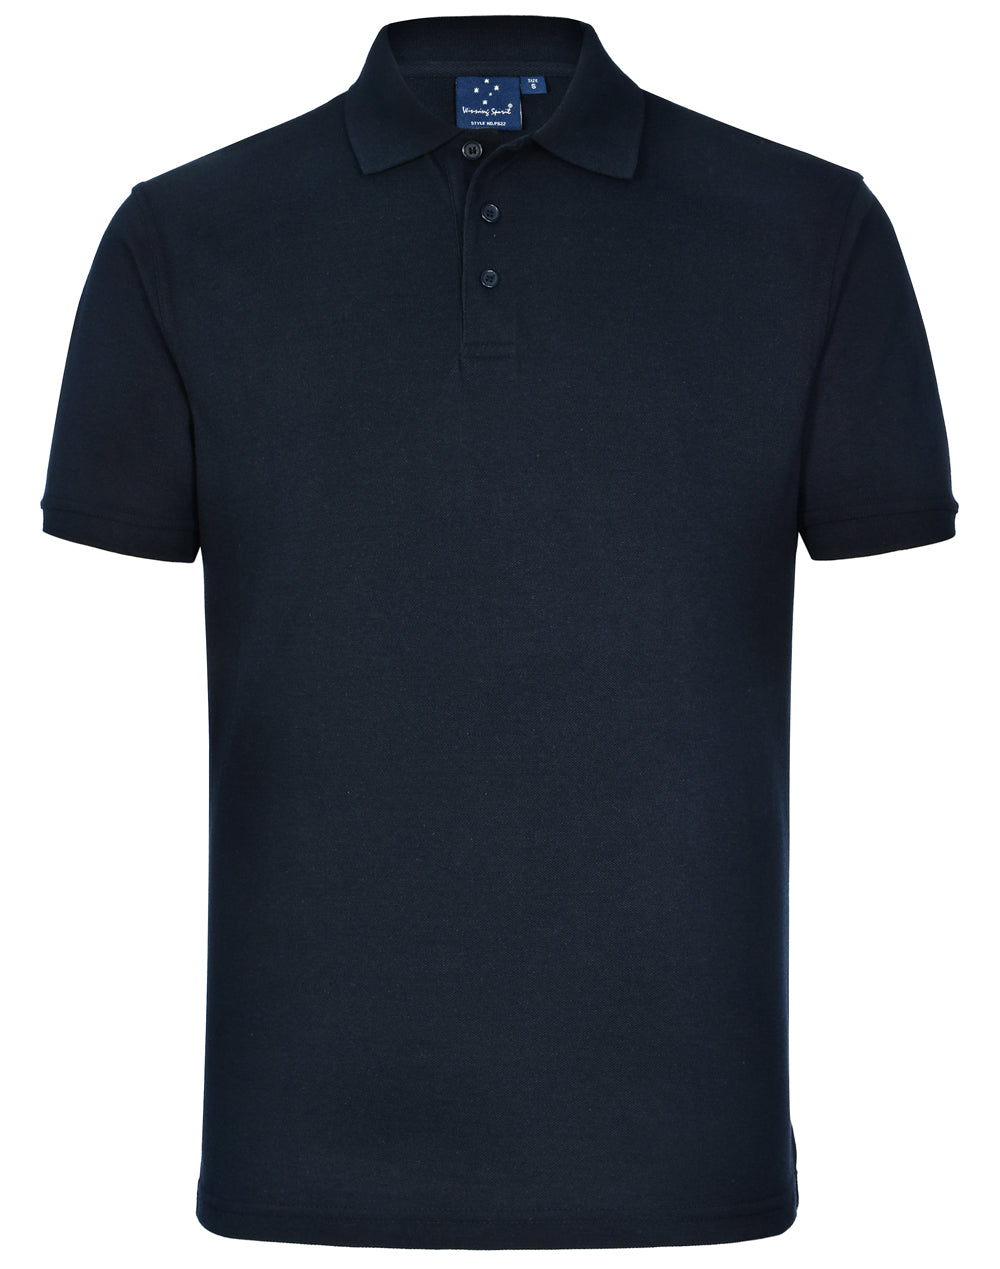 Deluxe Tight Pique Short Sleeve Polo - made by AIW